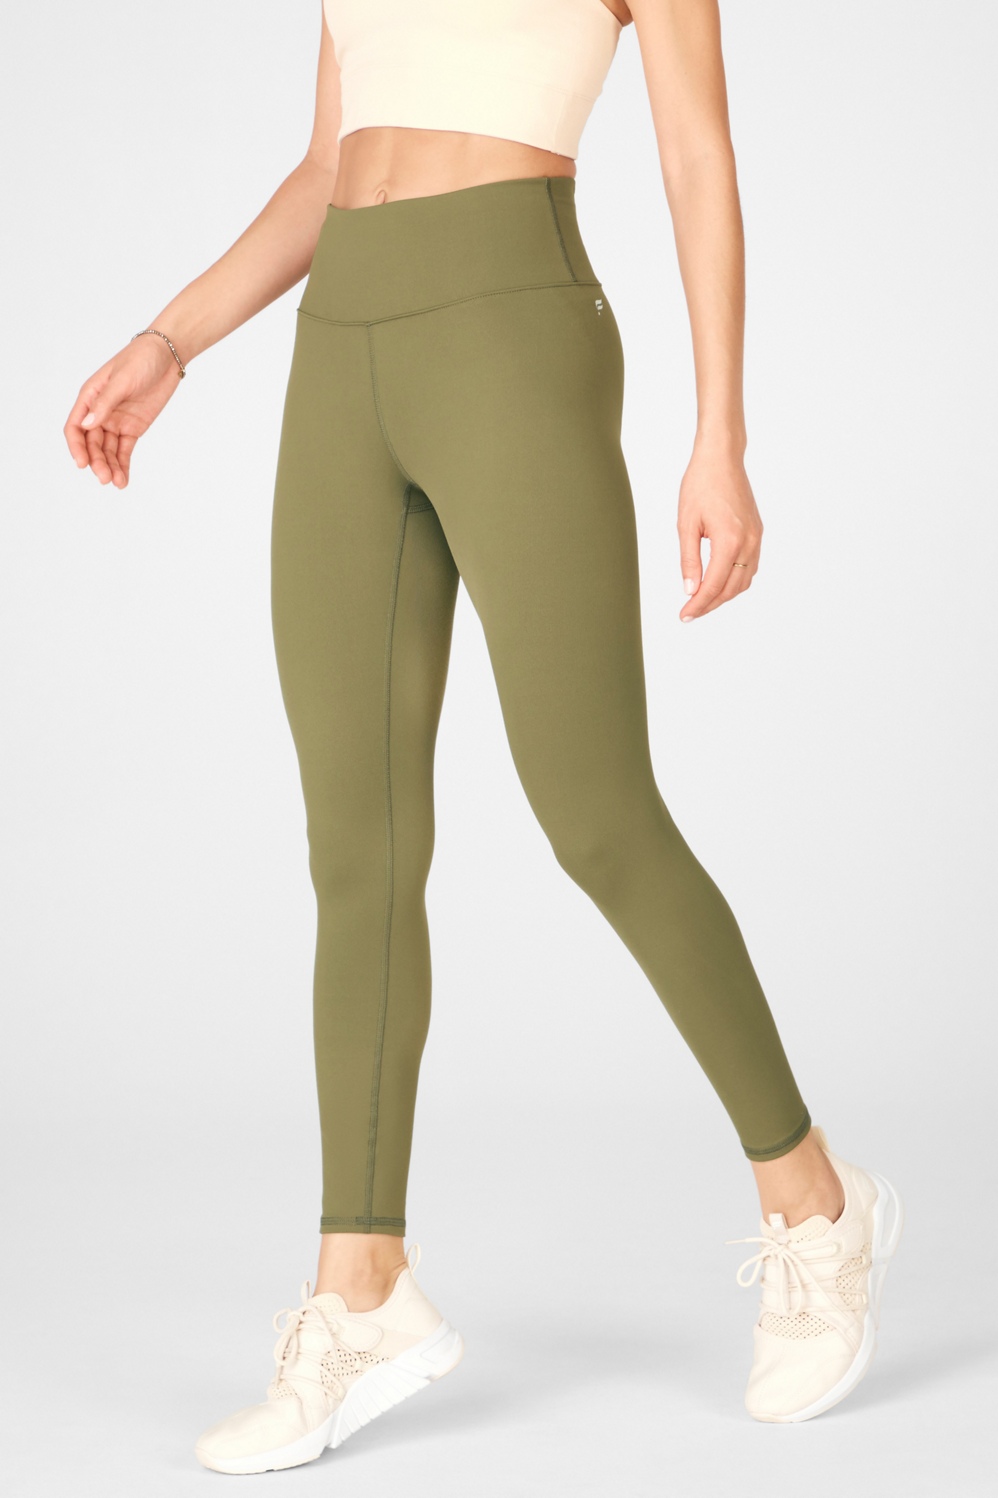 Yoga Pants Shopping  International Society of Precision Agriculture